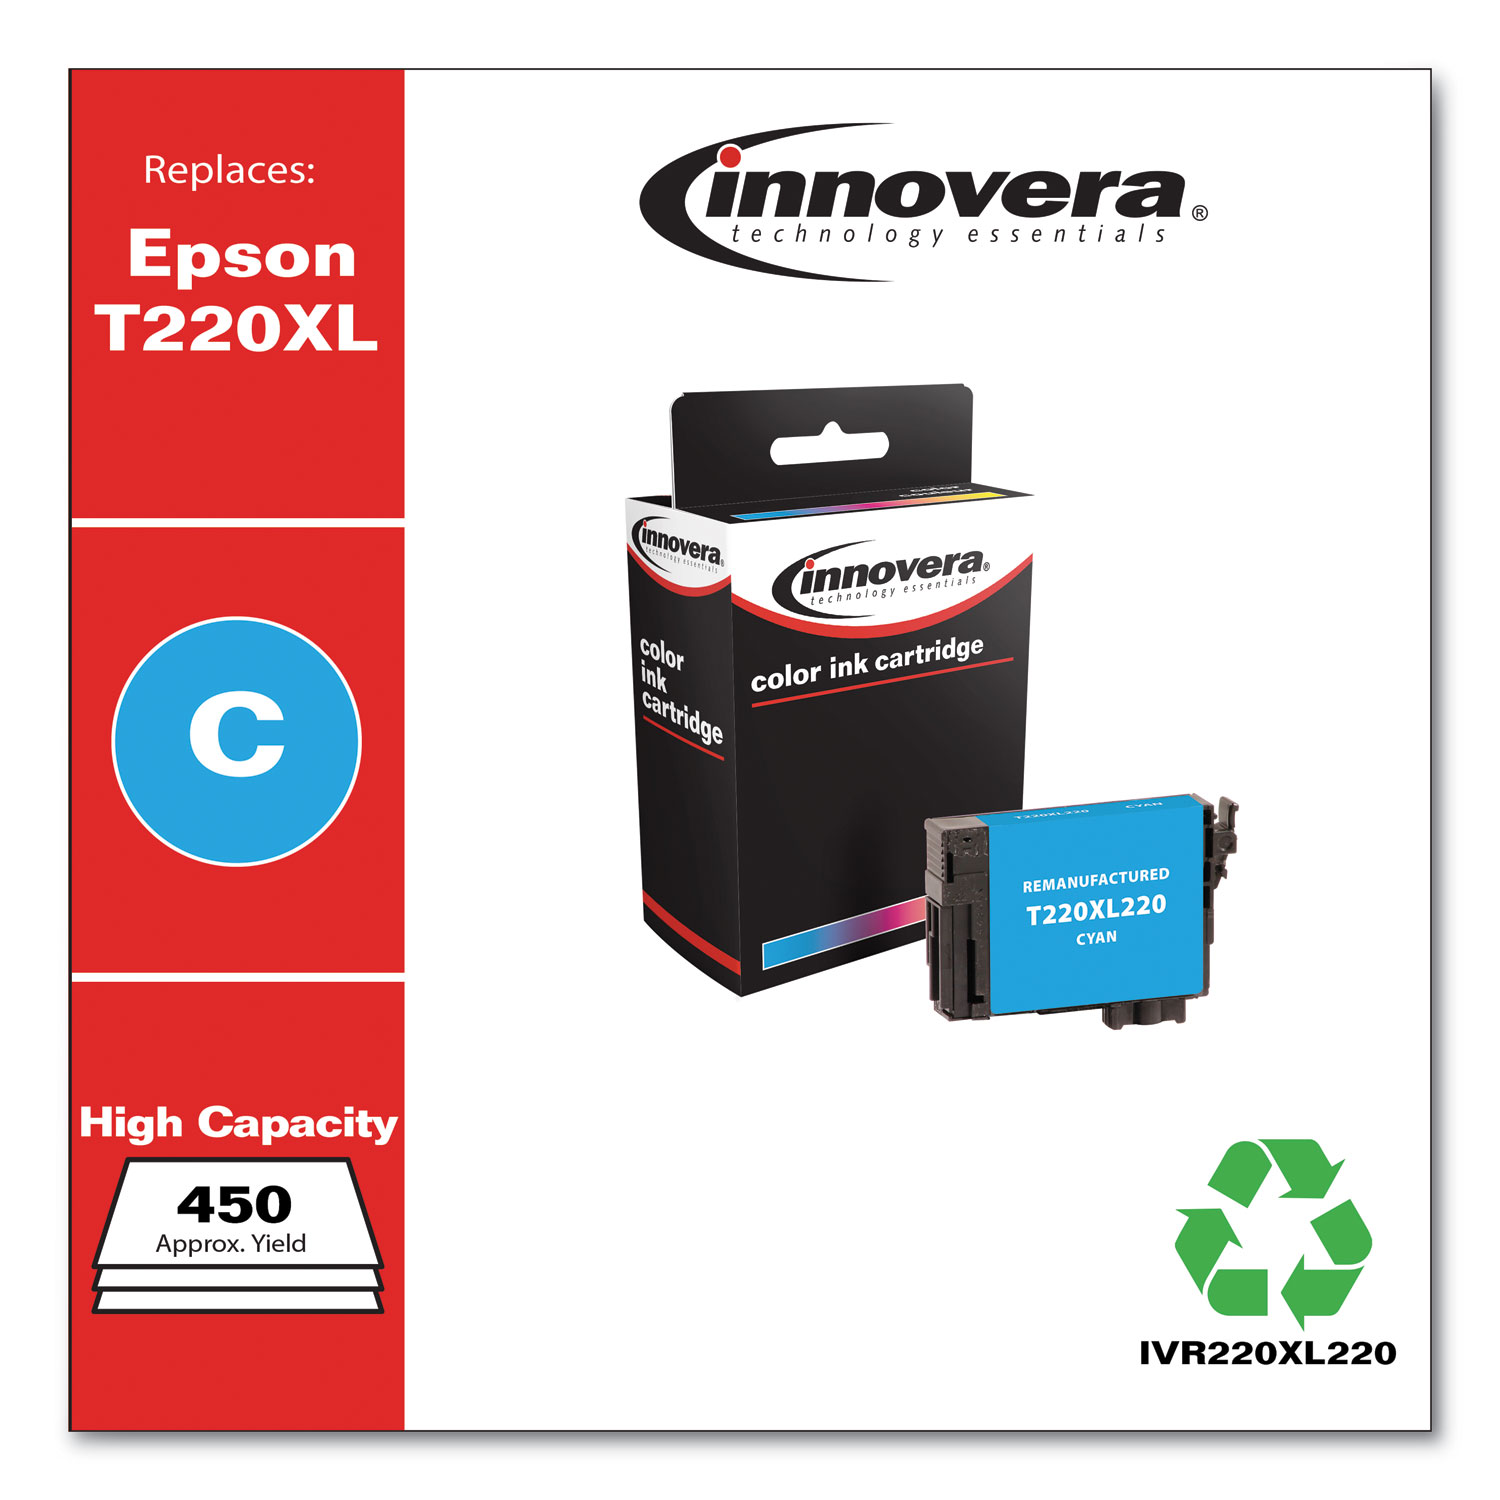  Innovera IVR220XL220 Remanufactured Cyan High-Yield Ink, Replacement for Epson T220XL (T220XL220), 450 Page-Yield (IVR220XL220) 